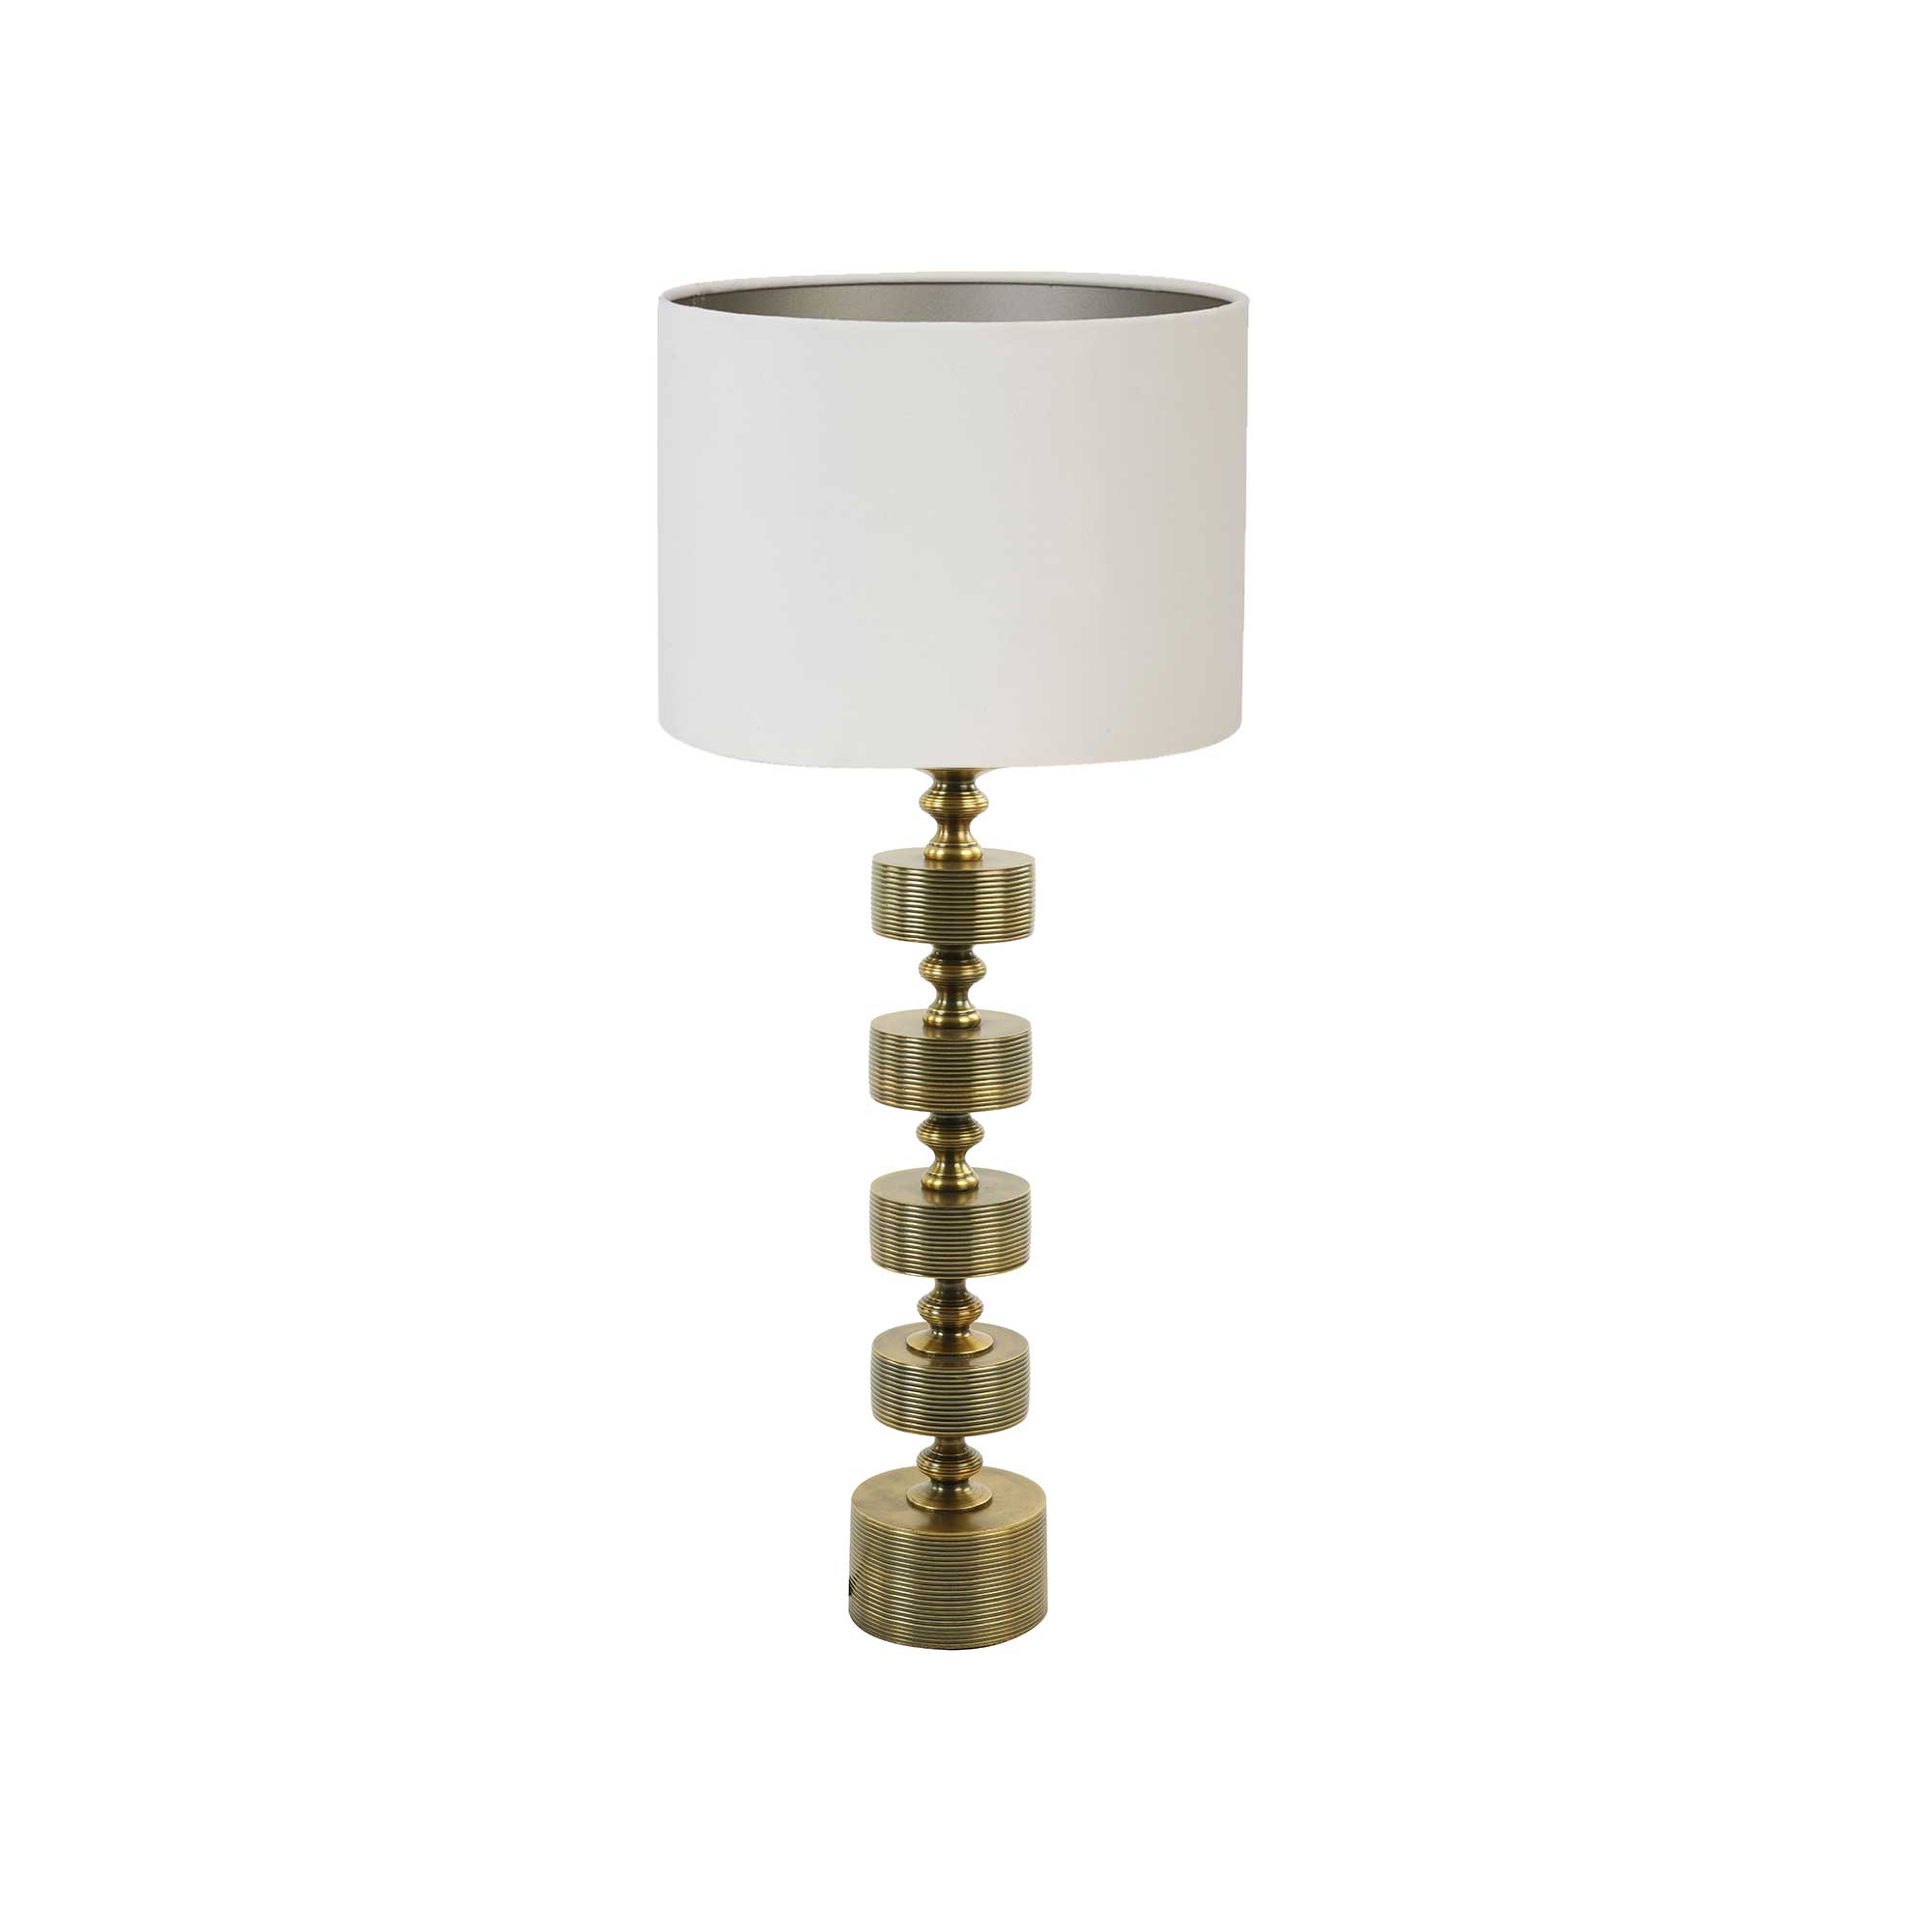 Gold Tiered Table Lamp | Barker & Stonehouse